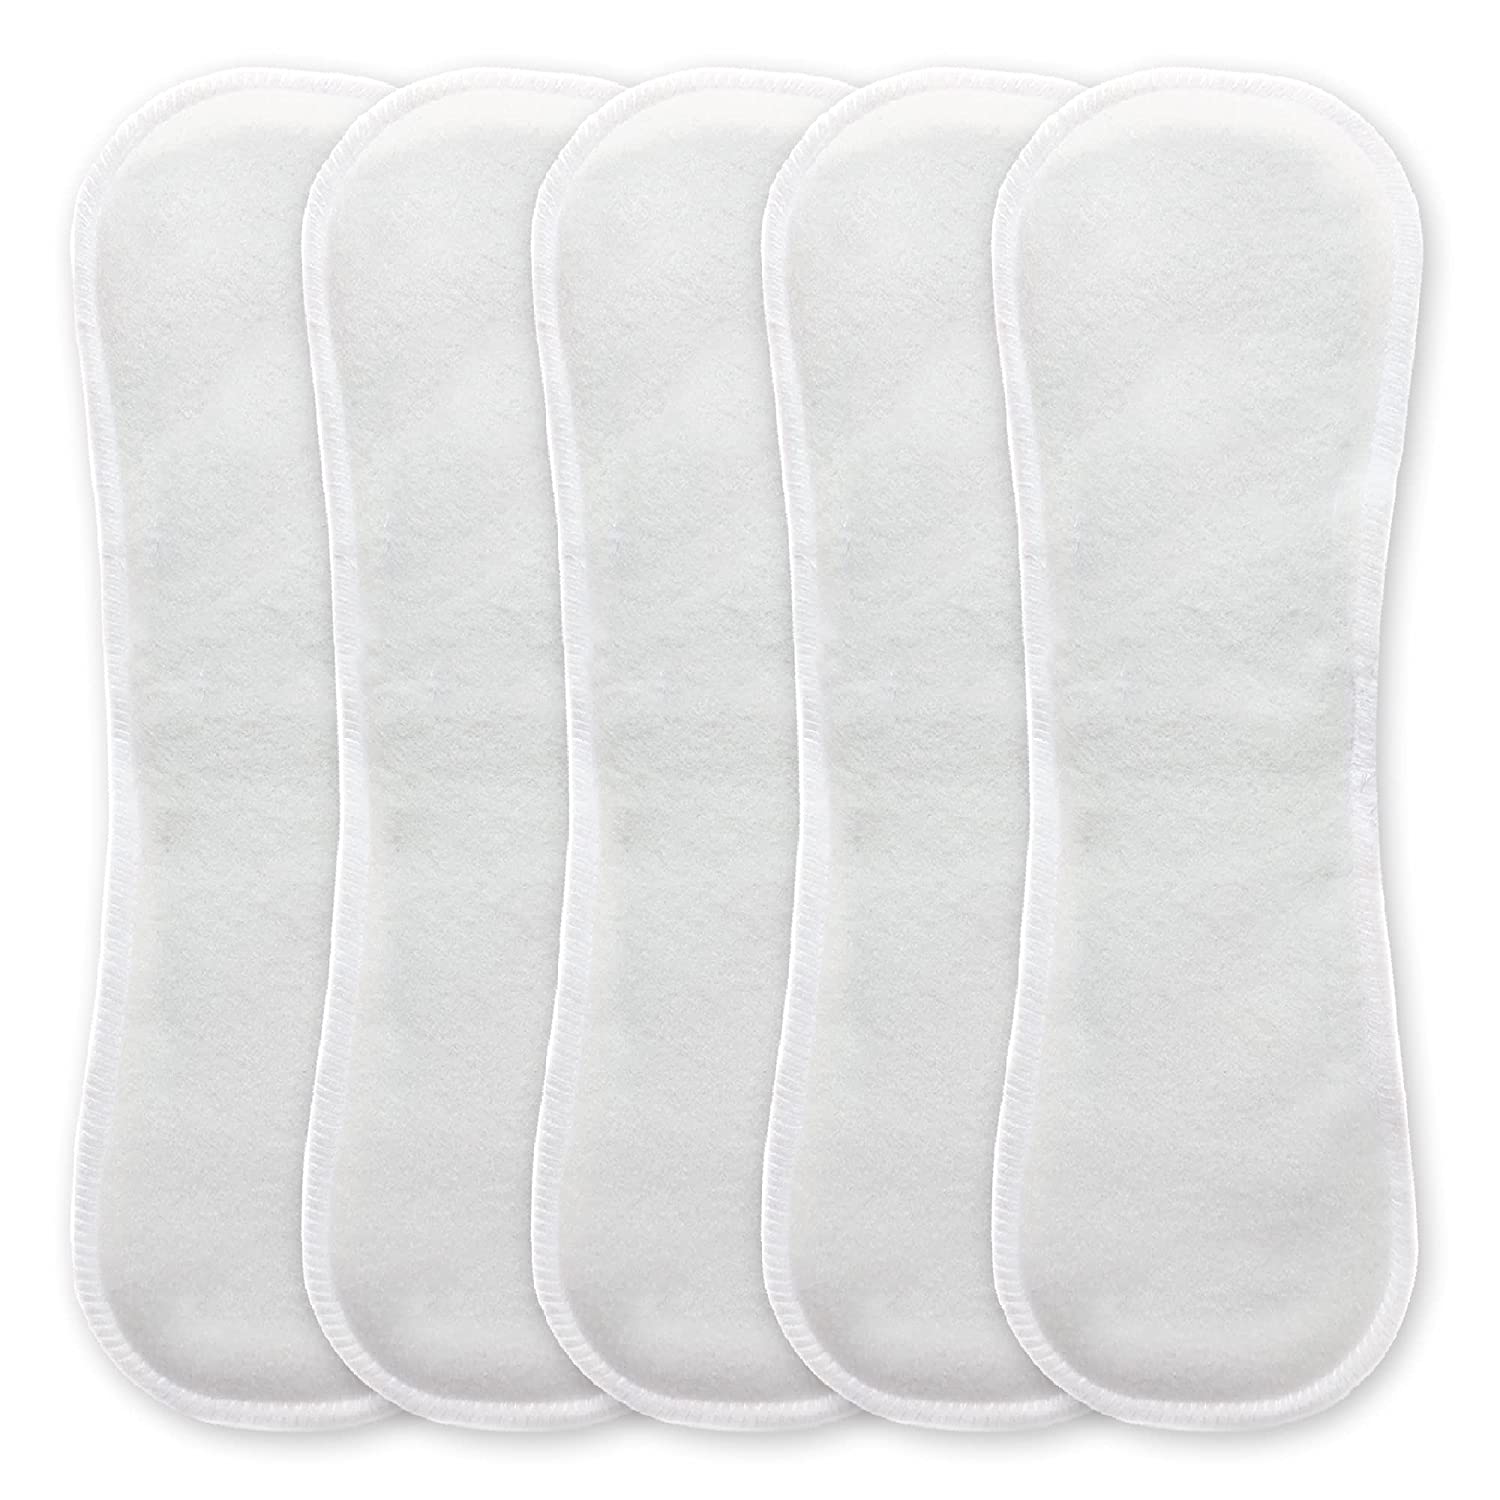 Paw Paw Diaper Baby Cloth Diaper Inserts